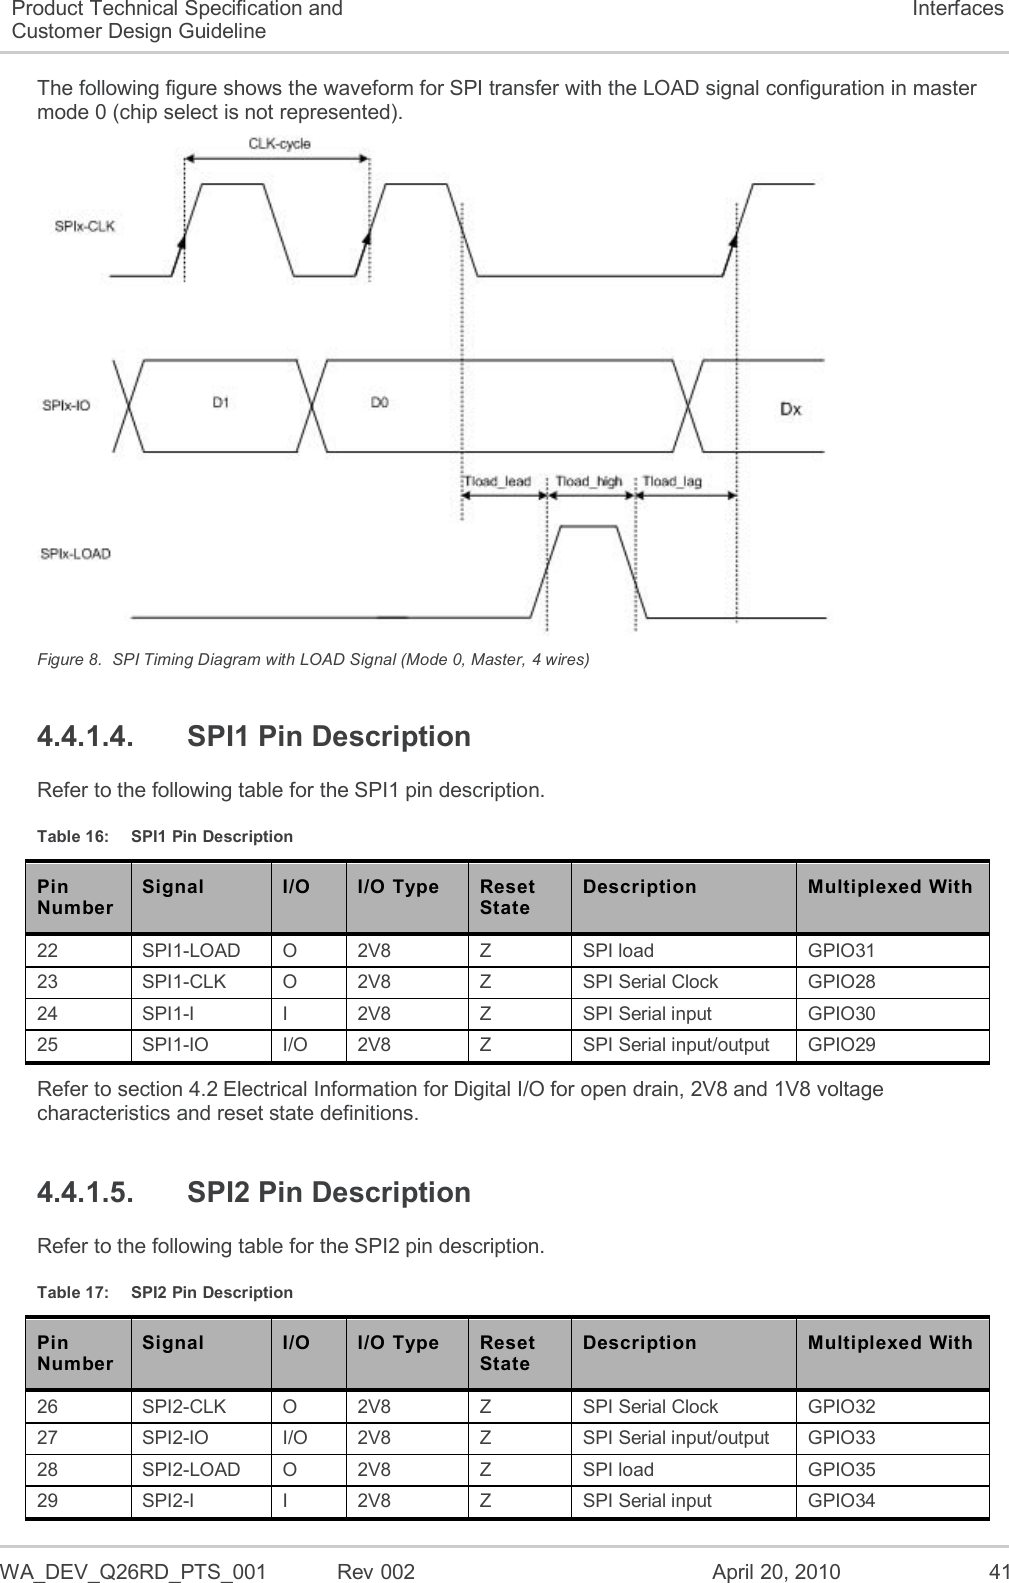  WA_DEV_Q26RD_PTS_001  Rev 002  April 20, 2010 41 Product Technical Specification and Customer Design Guideline Interfaces The following figure shows the waveform for SPI transfer with the LOAD signal configuration in master mode 0 (chip select is not represented).  Figure 8.  SPI Timing Diagram with LOAD Signal (Mode 0, Master, 4 wires) 4.4.1.4.  SPI1 Pin Description Refer to the following table for the SPI1 pin description. Table 16:  SPI1 Pin Description Pin Number Signal I/O I/O Type Reset State Description Multiplexed With 22 SPI1-LOAD O 2V8 Z SPI load  GPIO31 23 SPI1-CLK O 2V8 Z SPI Serial Clock GPIO28 24 SPI1-I I 2V8 Z SPI Serial input GPIO30 25 SPI1-IO I/O 2V8 Z SPI Serial input/output GPIO29 Refer to section 4.2 Electrical Information for Digital I/O for open drain, 2V8 and 1V8 voltage characteristics and reset state definitions. 4.4.1.5.  SPI2 Pin Description Refer to the following table for the SPI2 pin description. Table 17:  SPI2 Pin Description Pin Number Signal I/O I/O Type Reset State Description Multiplexed With 26 SPI2-CLK  O 2V8 Z SPI Serial Clock GPIO32 27 SPI2-IO I/O 2V8 Z SPI Serial input/output GPIO33 28 SPI2-LOAD O 2V8 Z SPI load  GPIO35 29 SPI2-I I 2V8 Z SPI Serial input GPIO34 